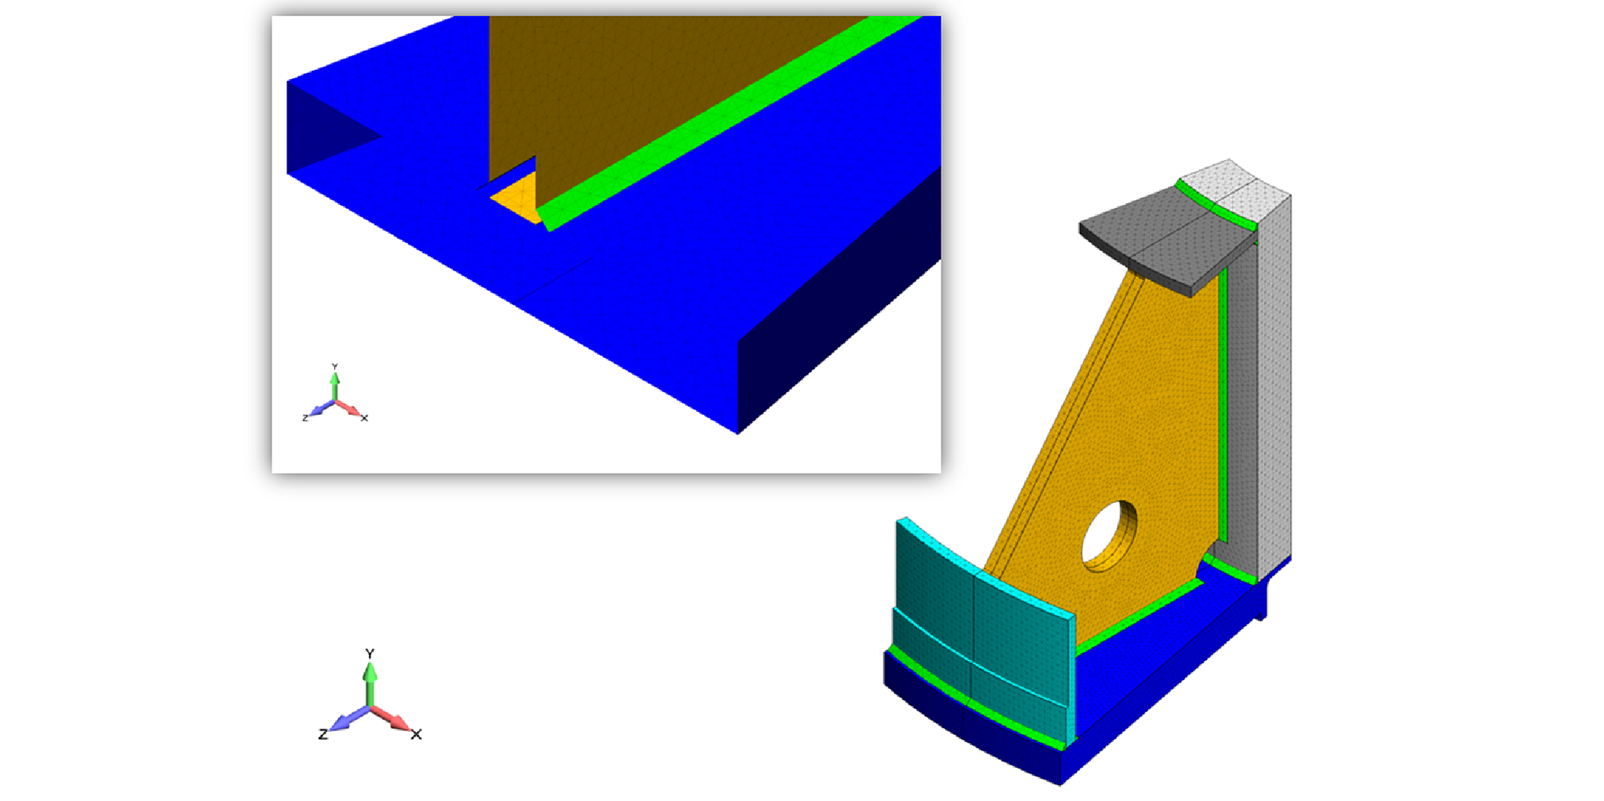 FEA Thermal-Stress Analysis of Welds for High-Cycle Fatigue Analysis - FEA Consulting Services, Portland, Oregon